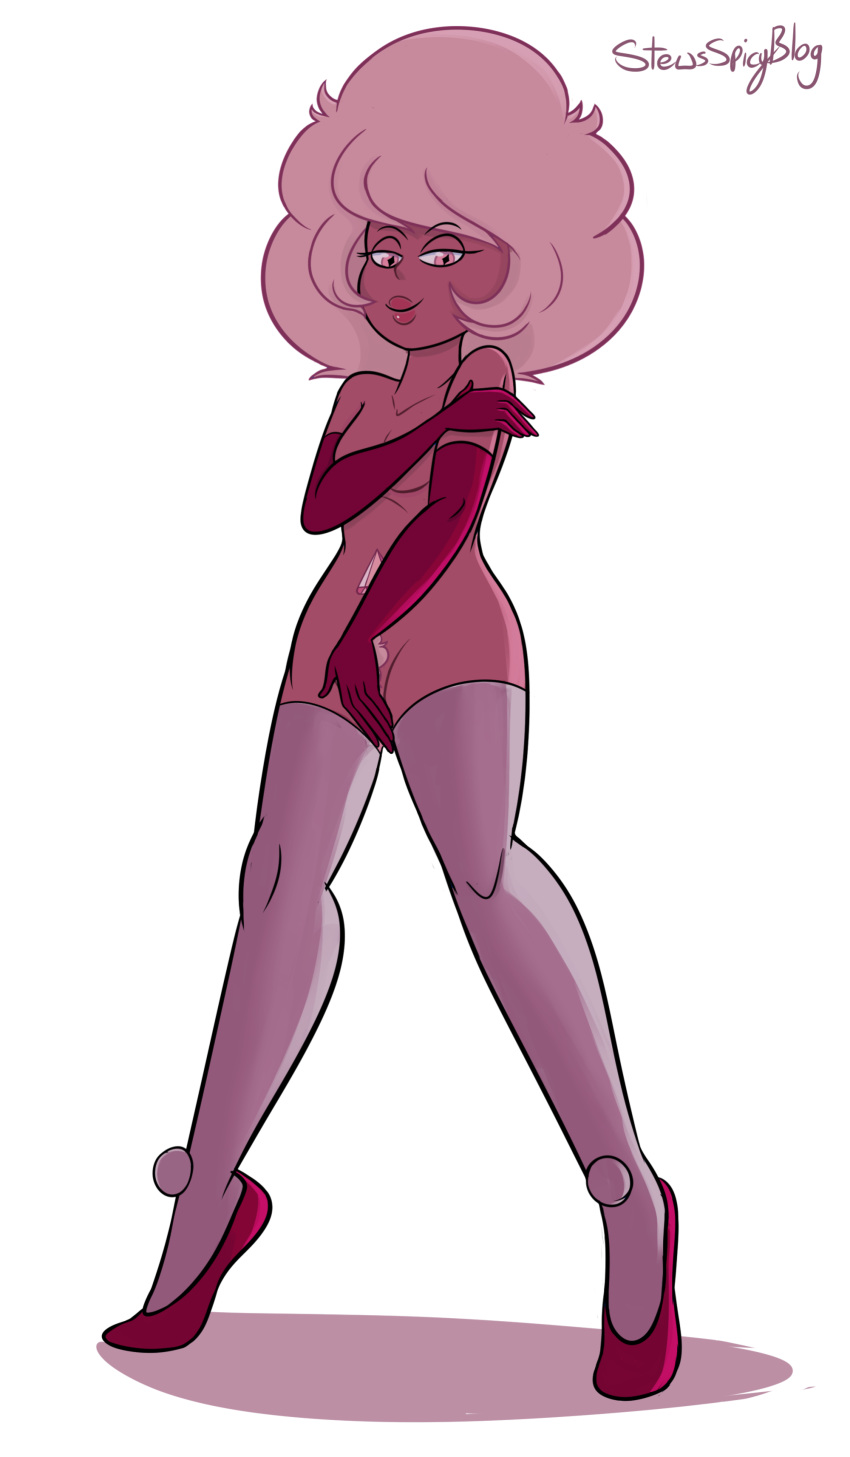 from steven pink diamond universe Ane_to_boin